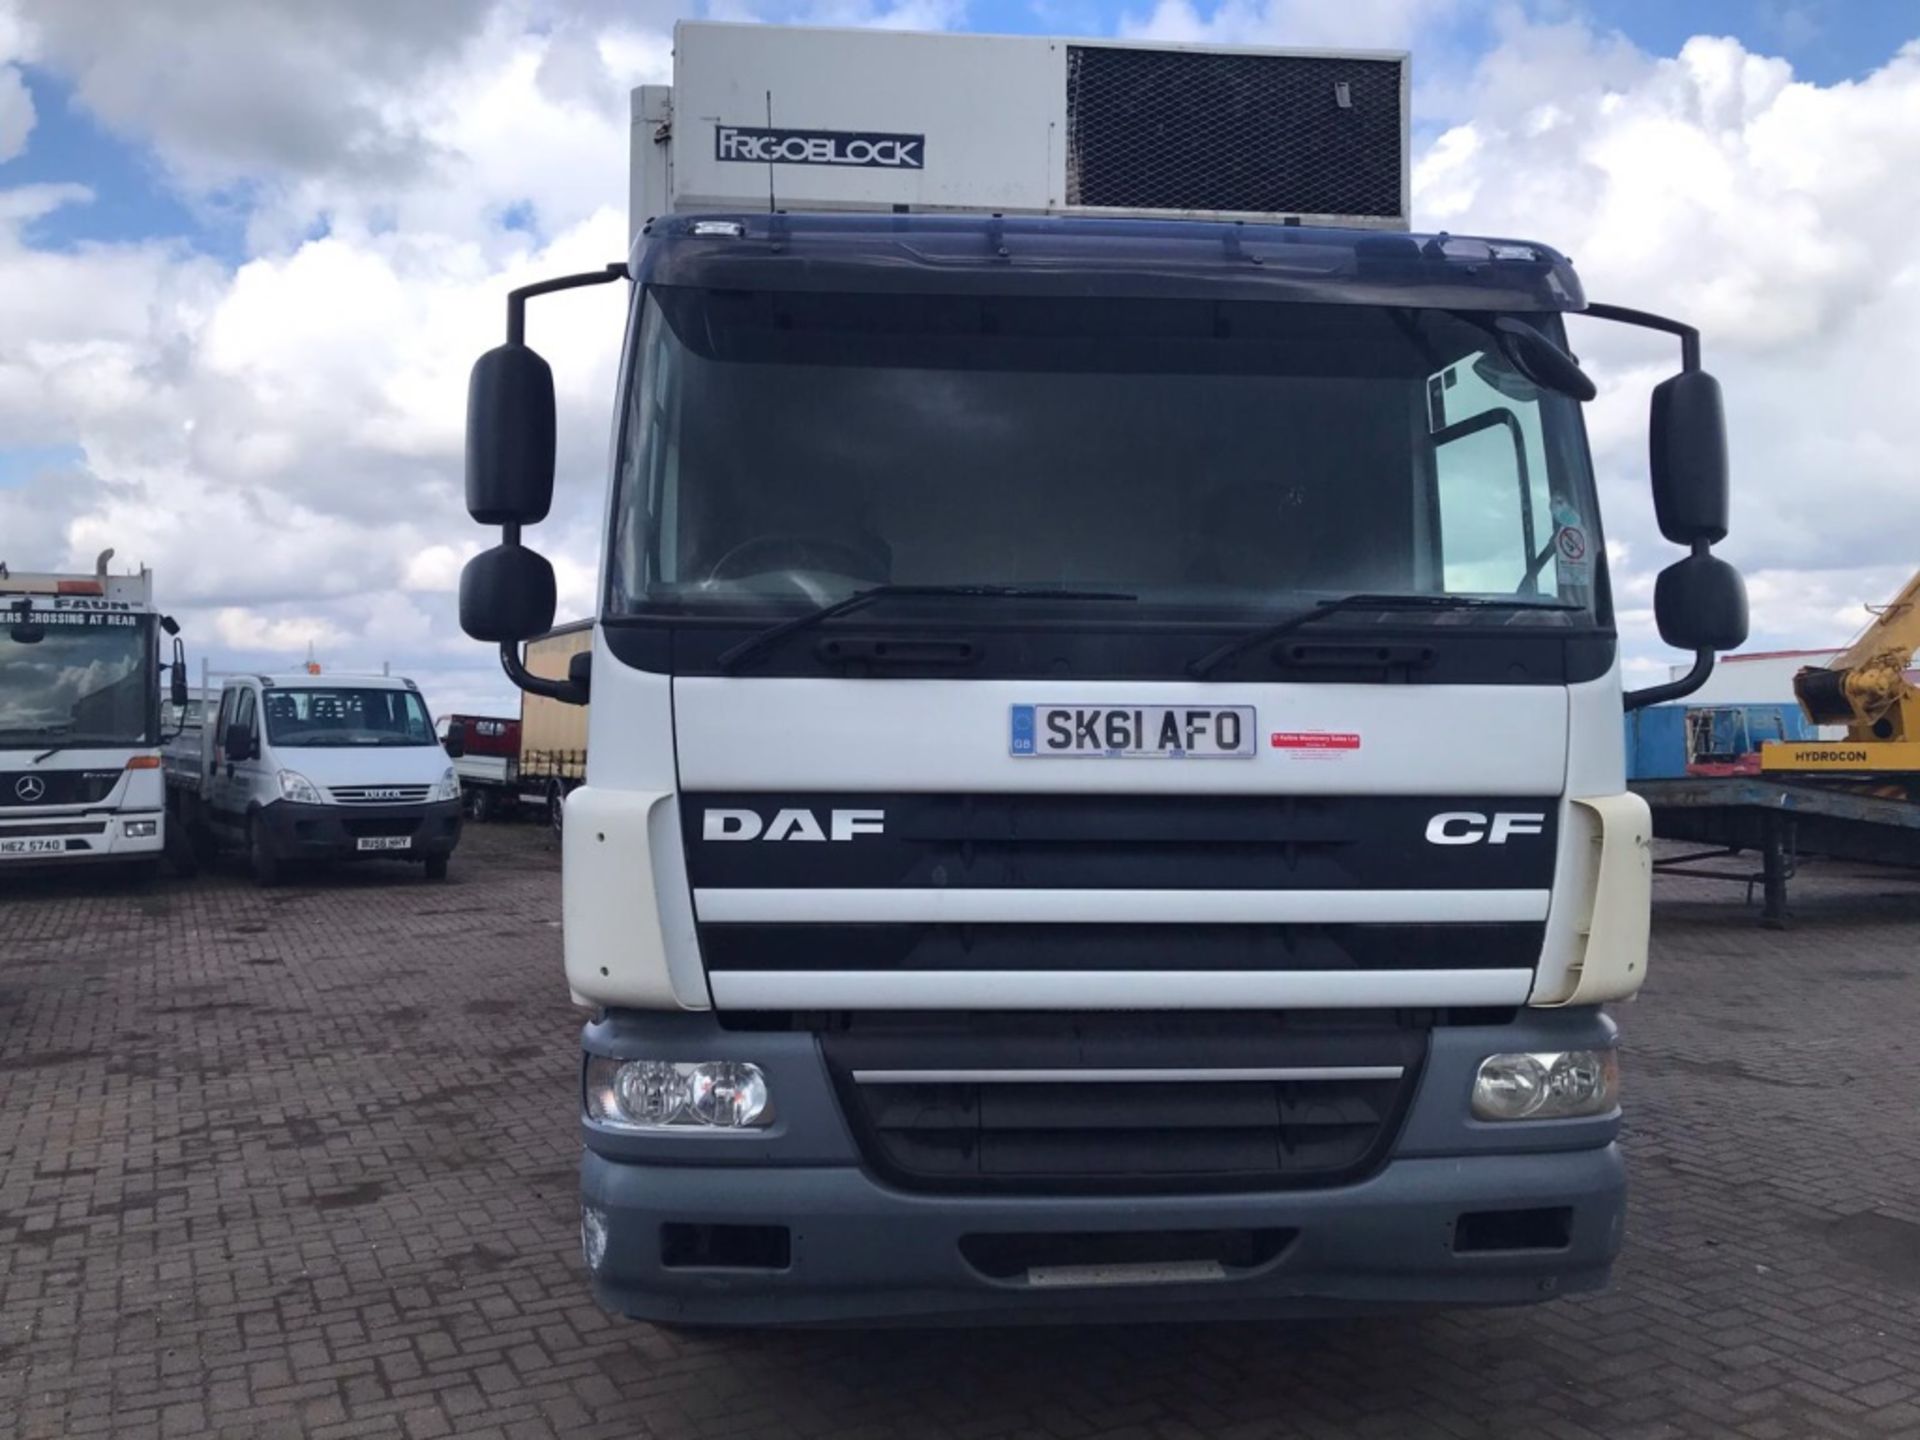 2011 Daf CF65 Refrigerated Truck - Image 2 of 13